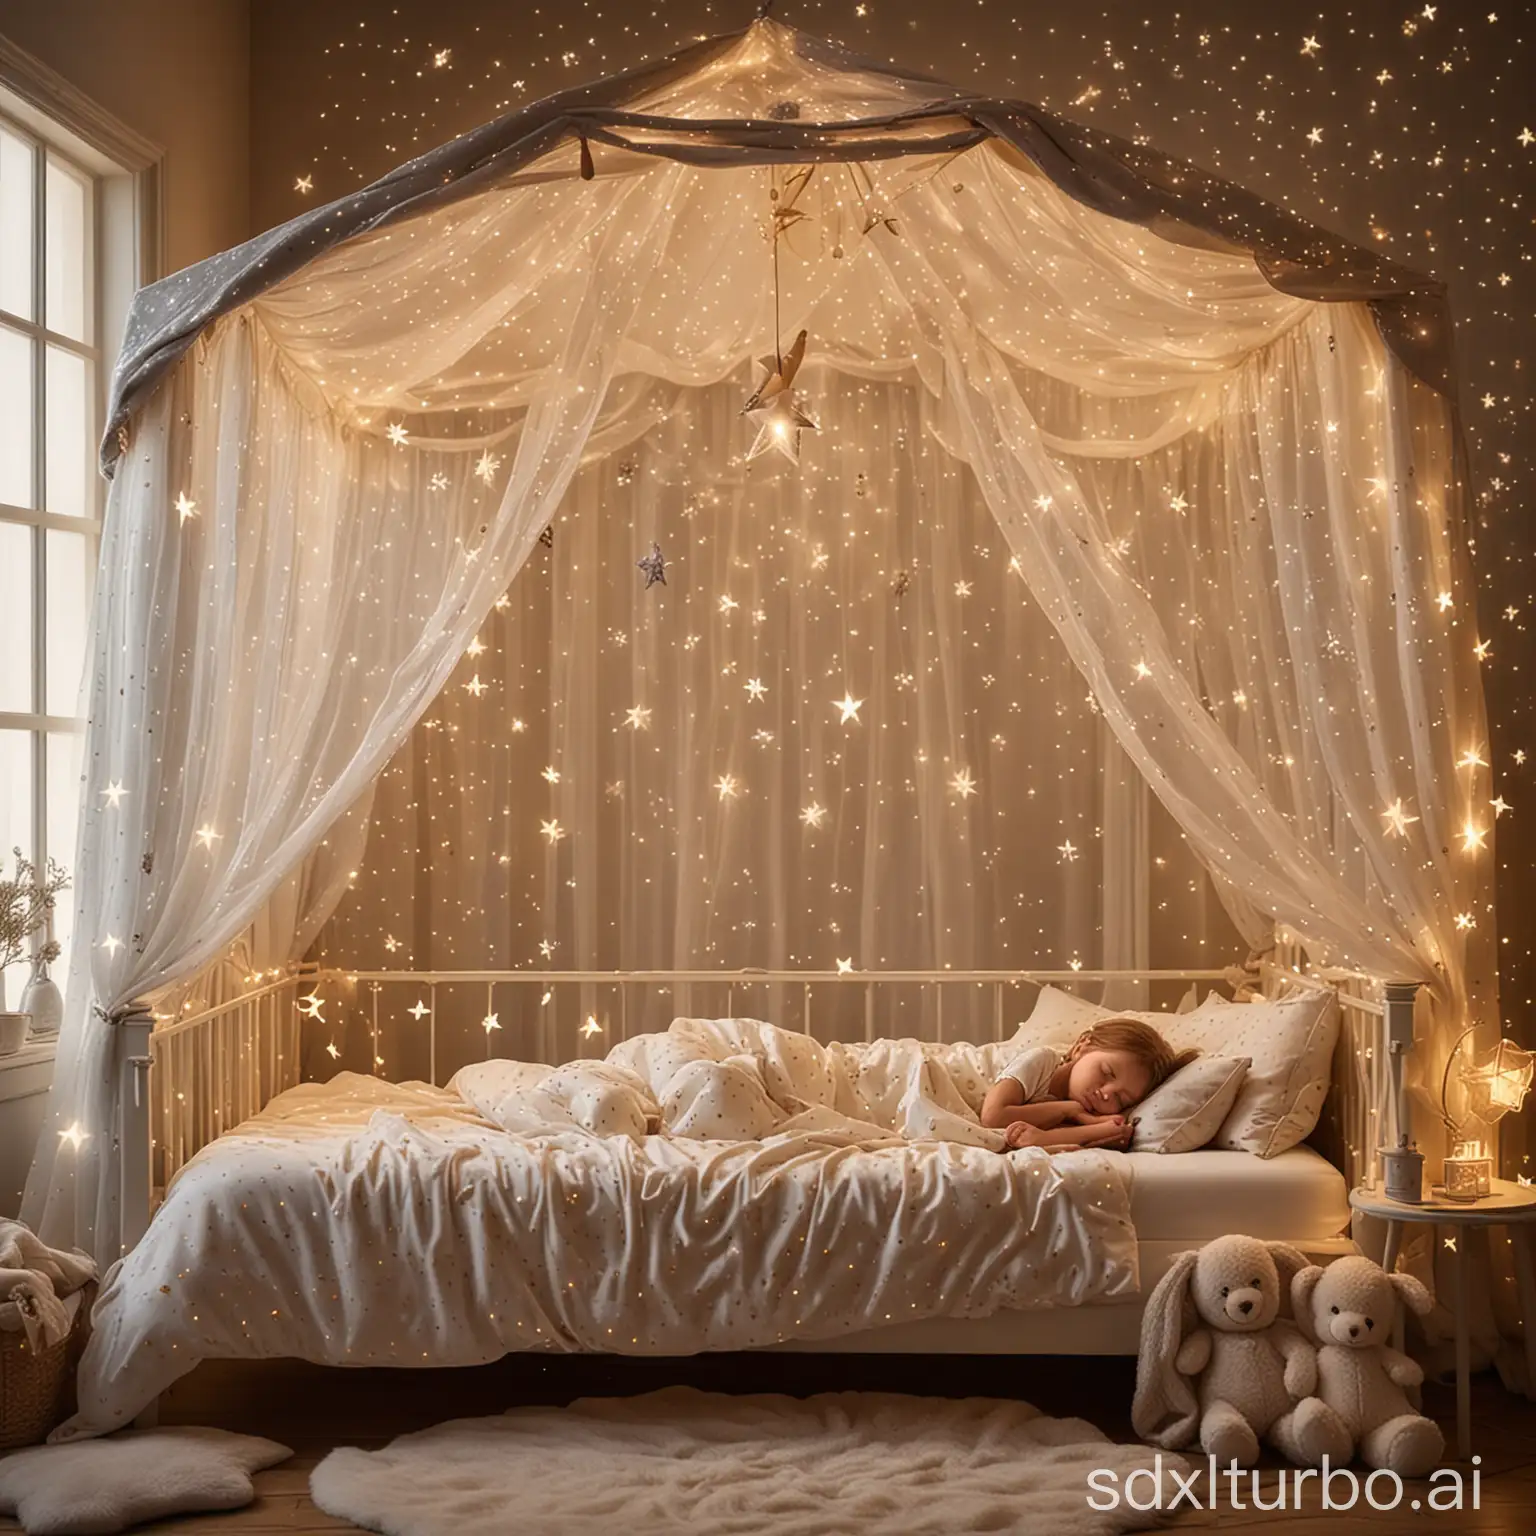 Dreamy-Child-Sleeping-on-Starlit-Canopy-Bed-with-Plush-Meteor